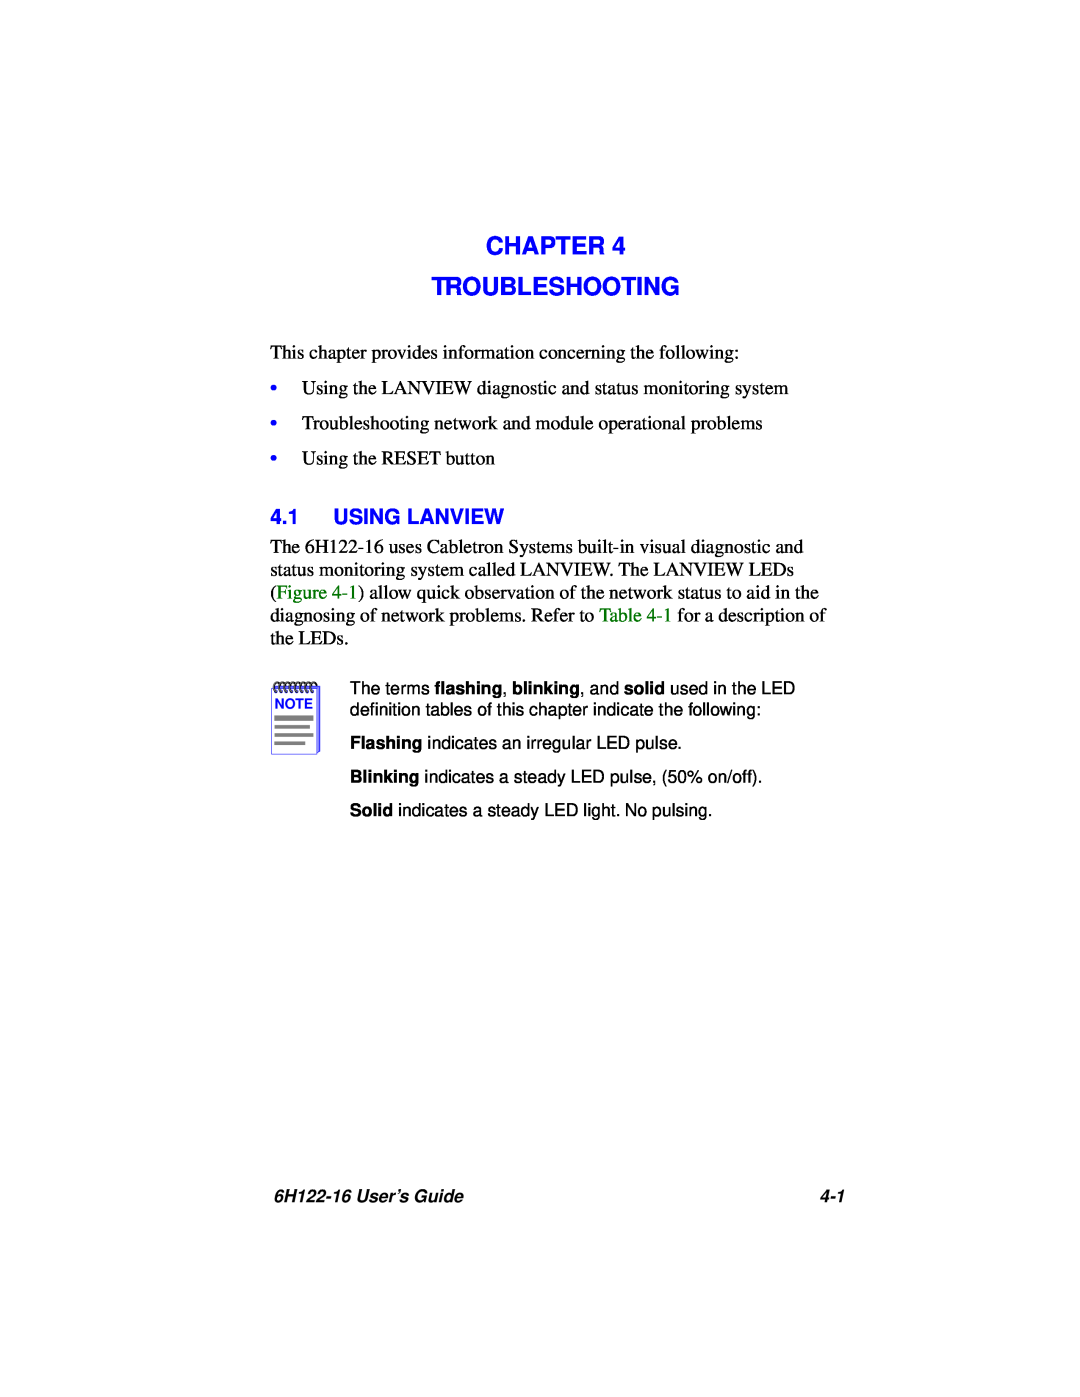 Cabletron Systems 6H122-16 manual Chapter Troubleshooting, Using Lanview 